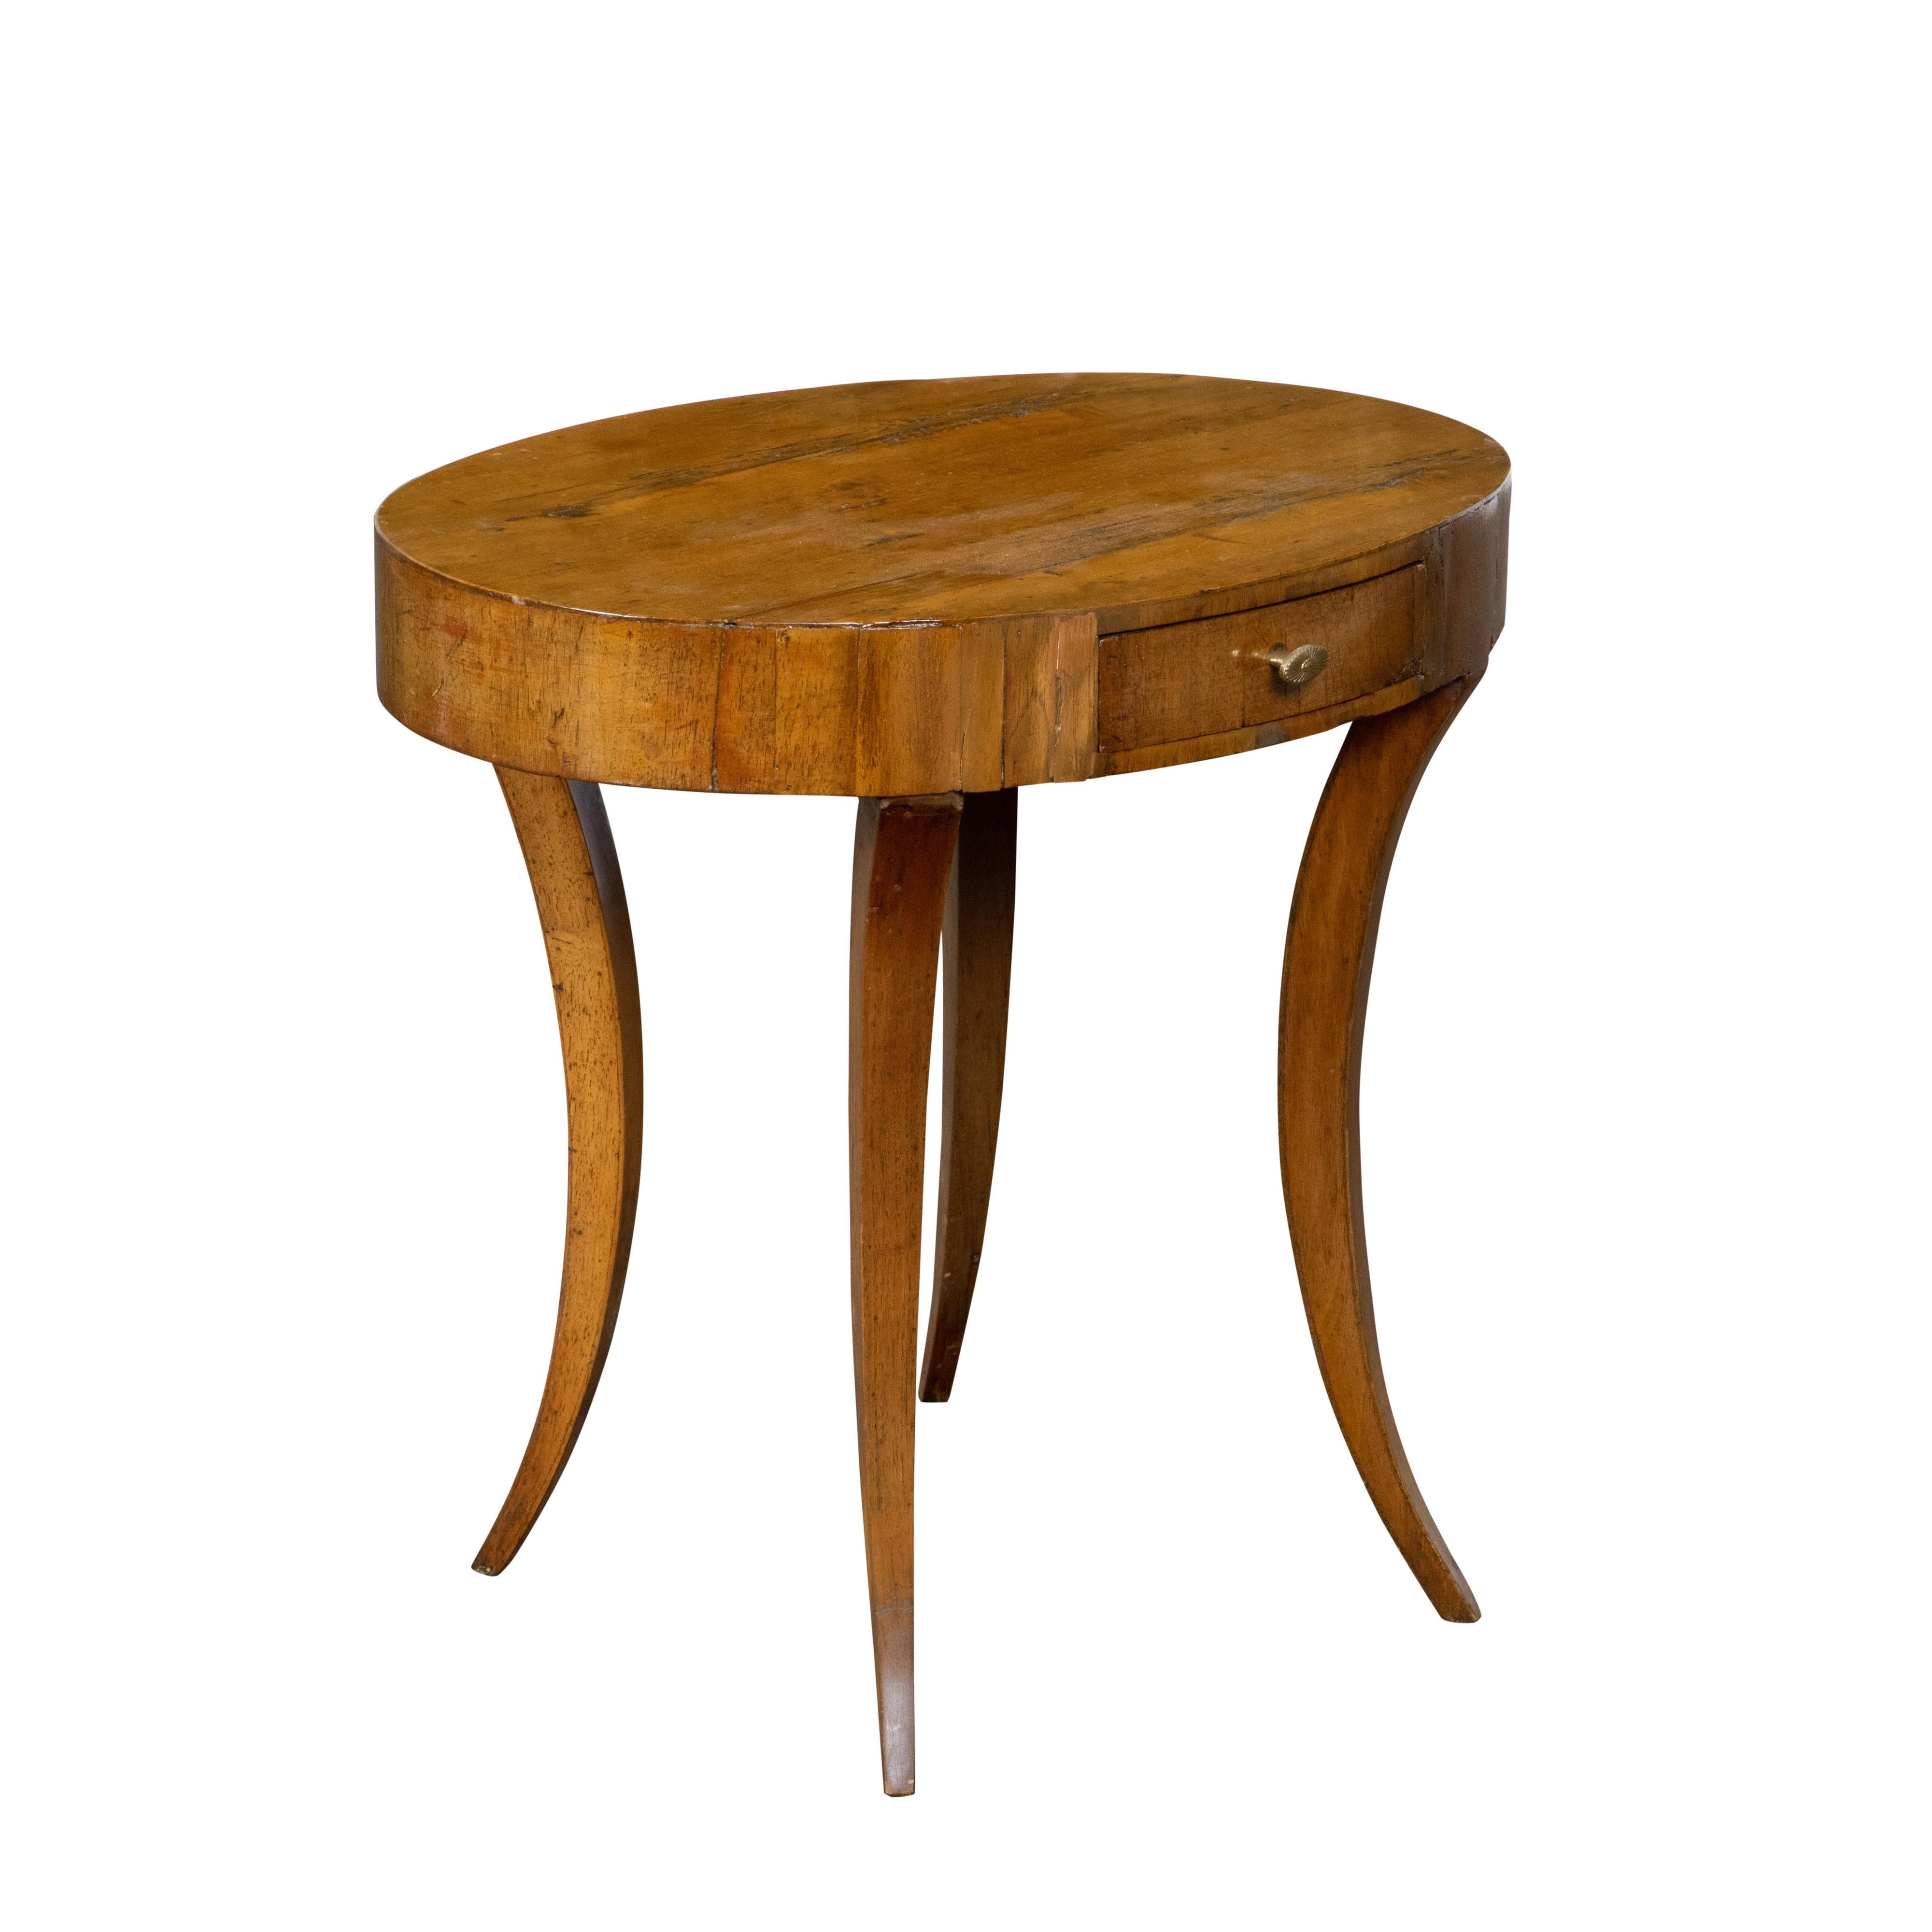 An Italian Neoclassical walnut veneered accent table from the early 19th century, with oval top, single drawer, brass hardware, saber legs and rustic character. Created in Italy during the early years of the 19th century, this walnut accent table